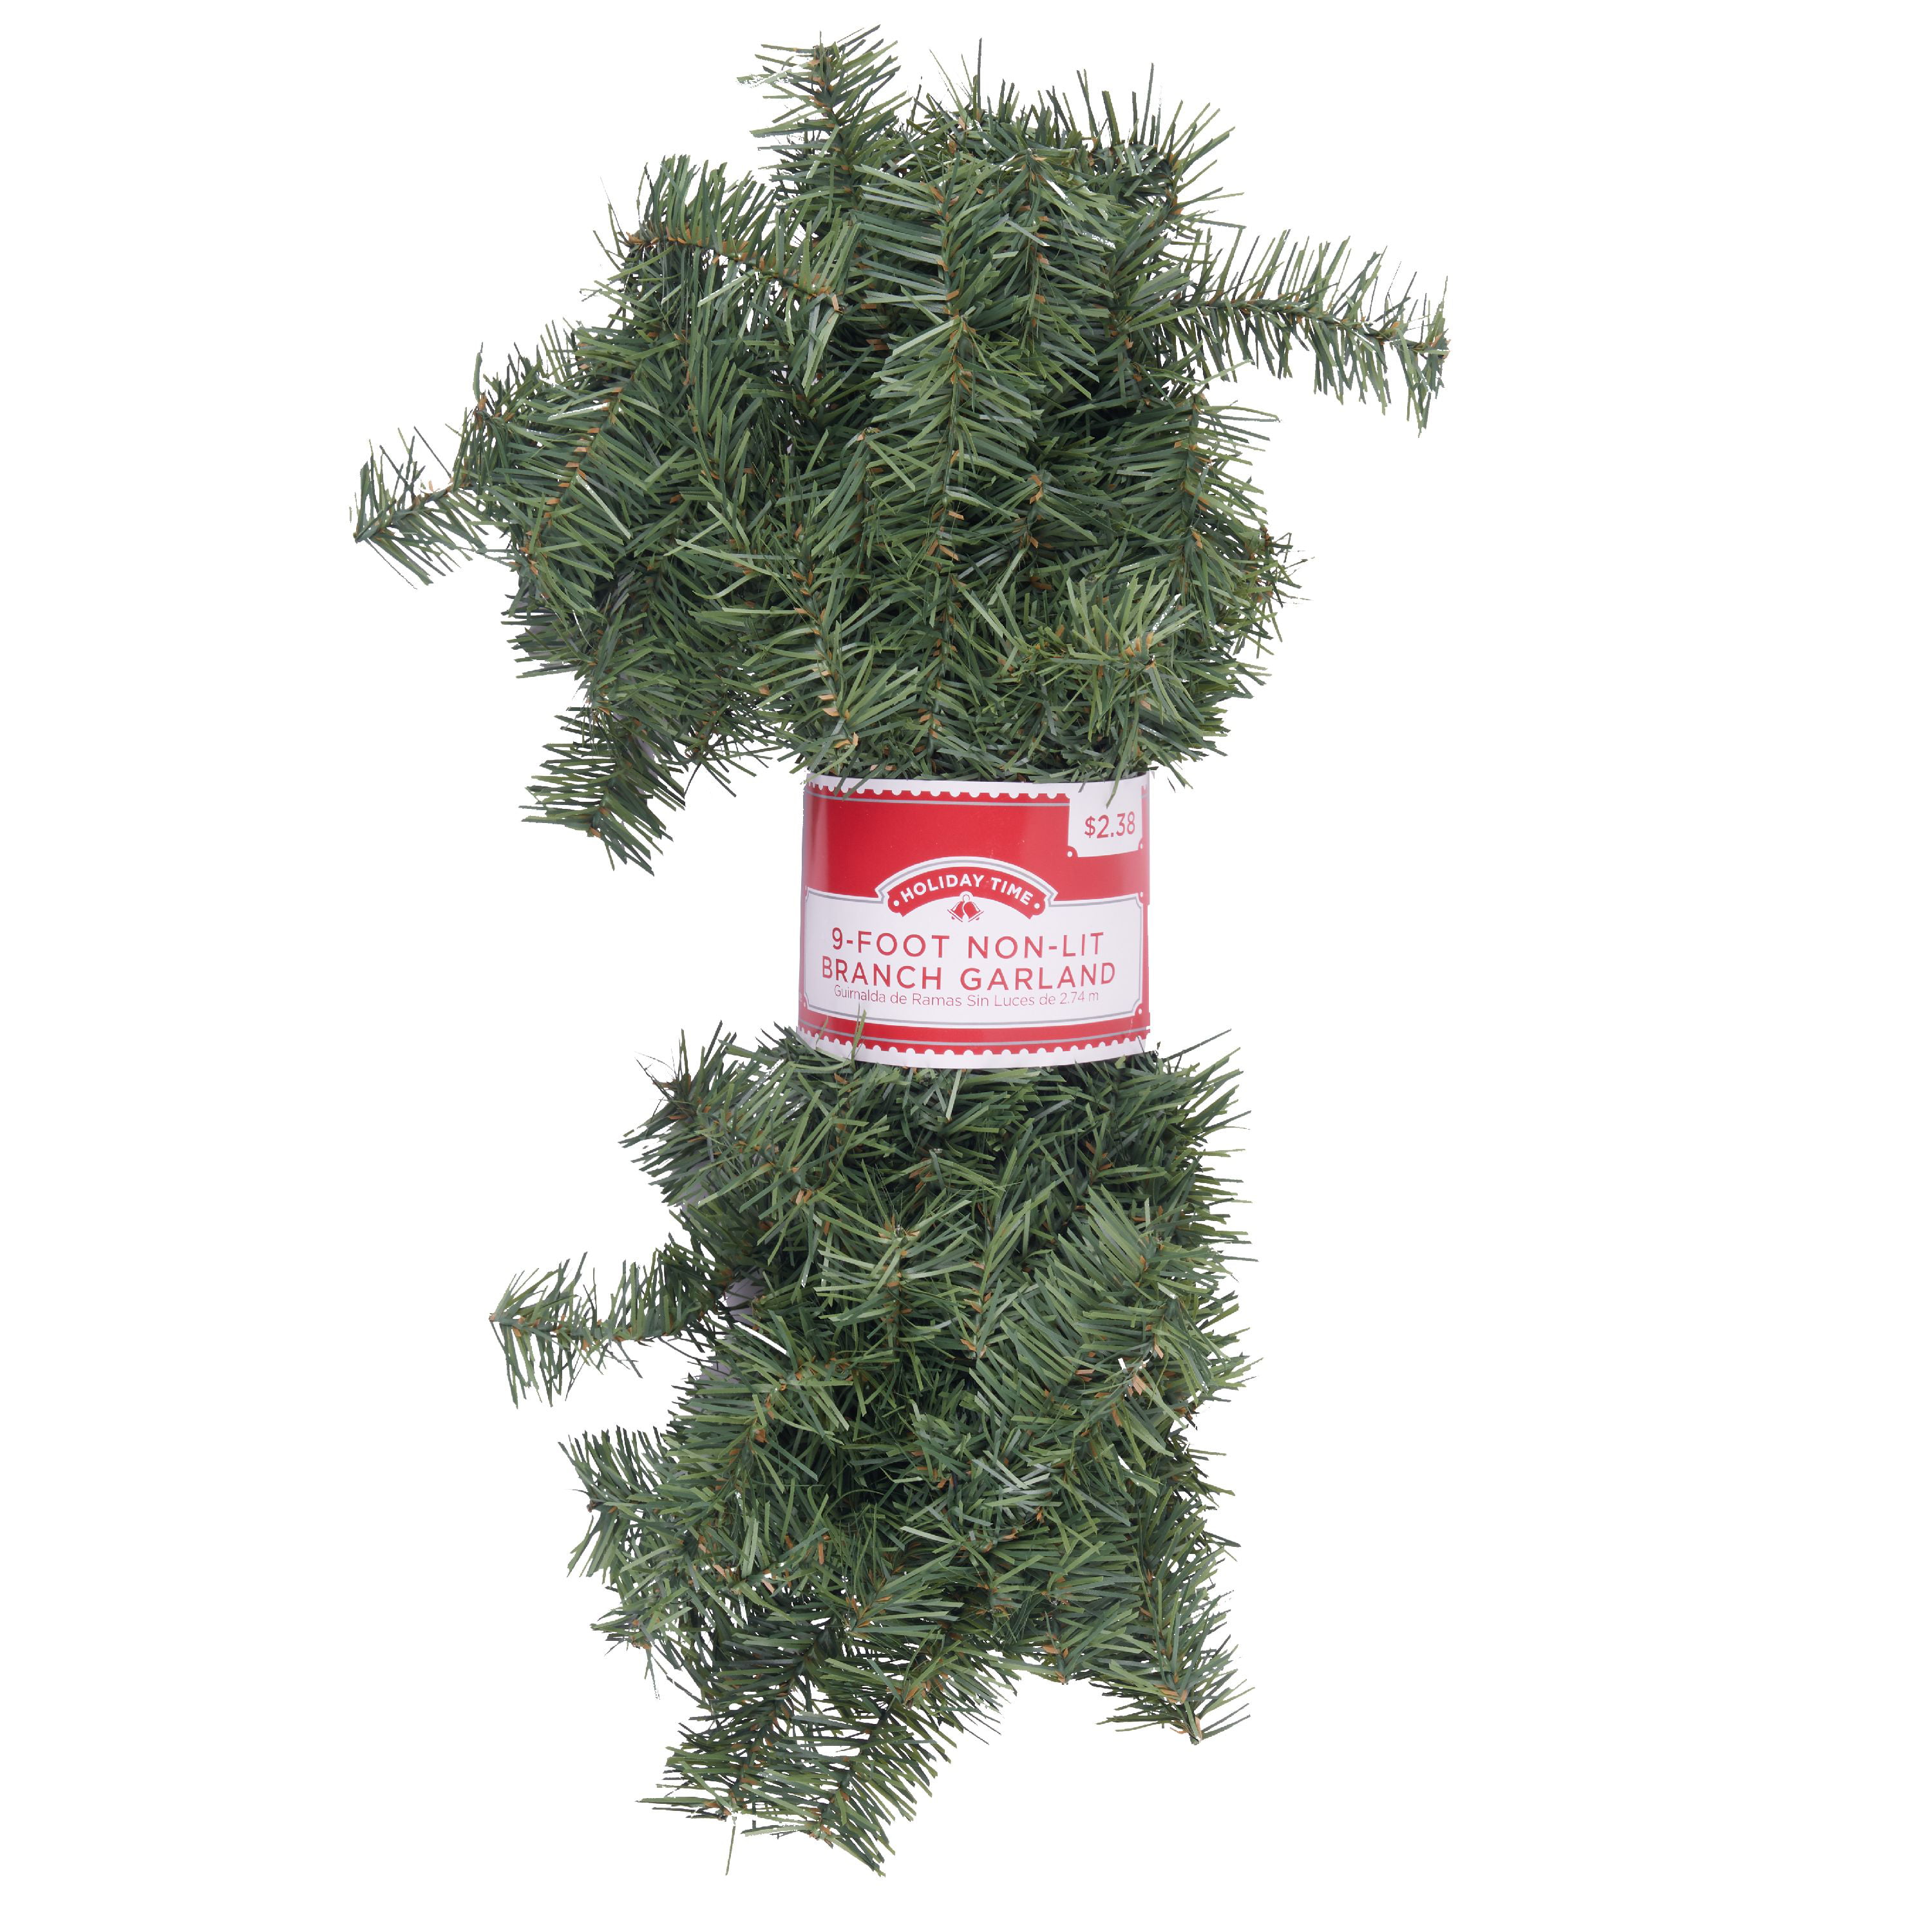 New Holiday Time 9 Foot Non-Lit Christmas Soft Pine Green Garland Inside Decor 